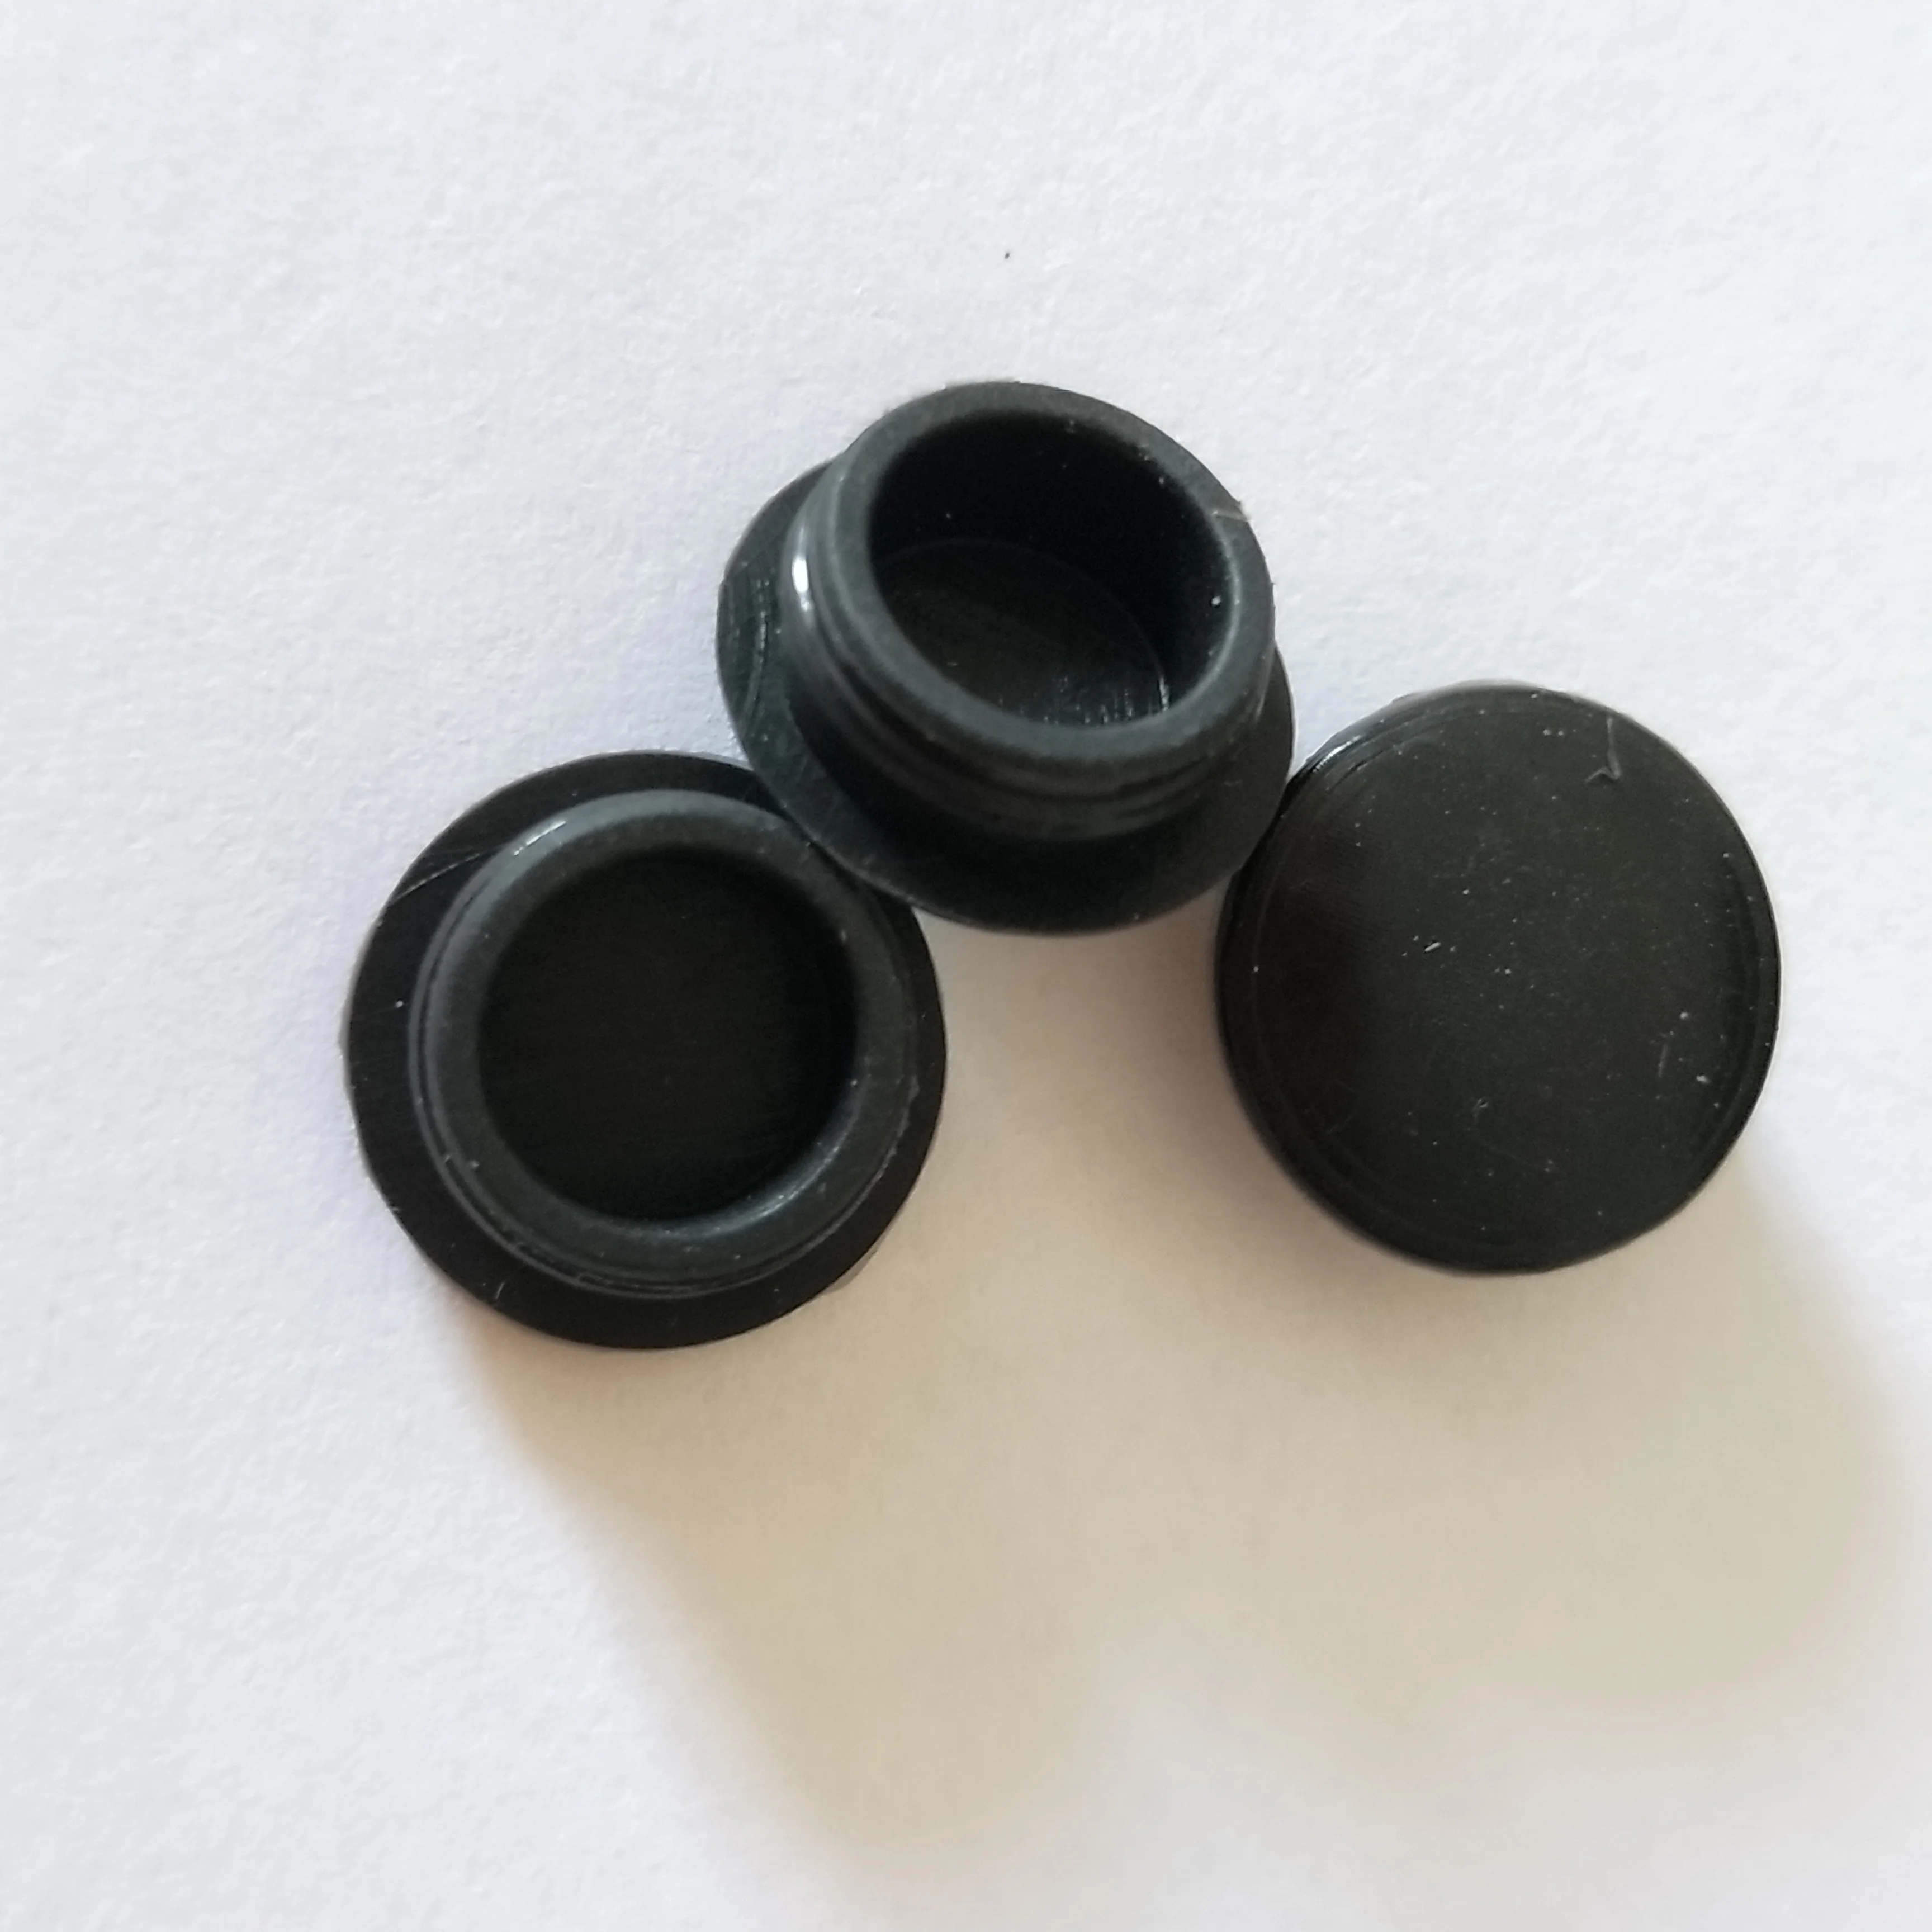 motor Verplicht band Silicone Bung 5 Mm M6 Hole Plug 5.8 Mm Rubber Tpe Sealed Plugs - Buy  Silicone Bung,Rubber Plug,Rock Hole Plug Product on Alibaba.com